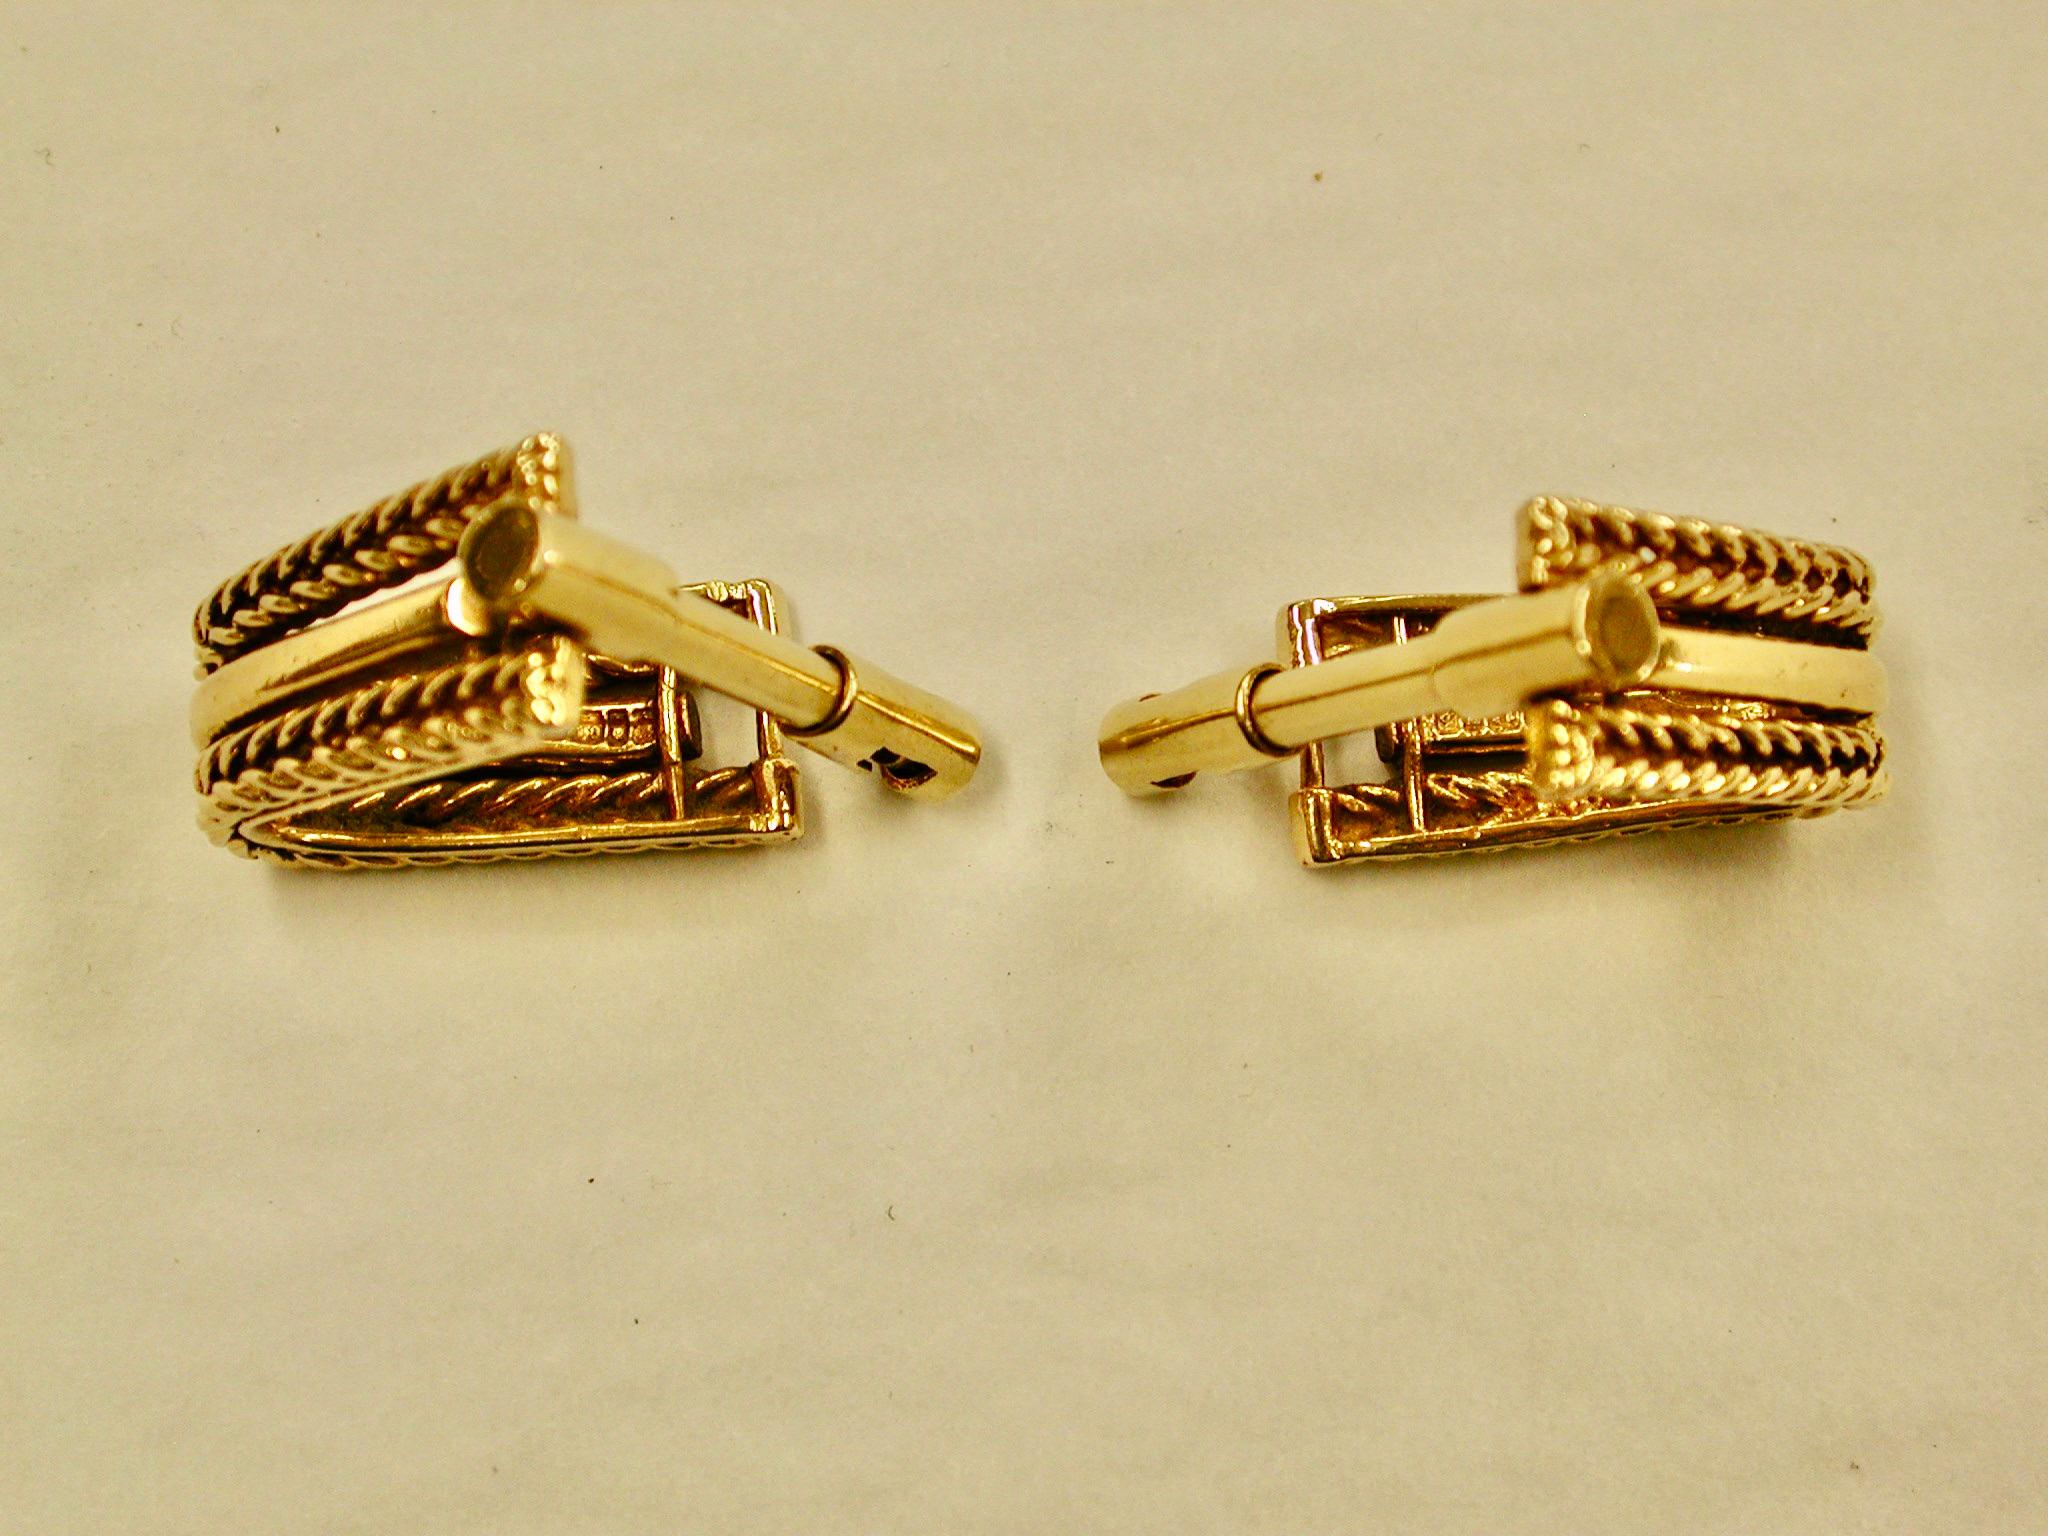 Modern Pair of Men's 18ct Gold Cufflinks, Braided Foxlink with Sprung Bar Fitting, 1957 For Sale